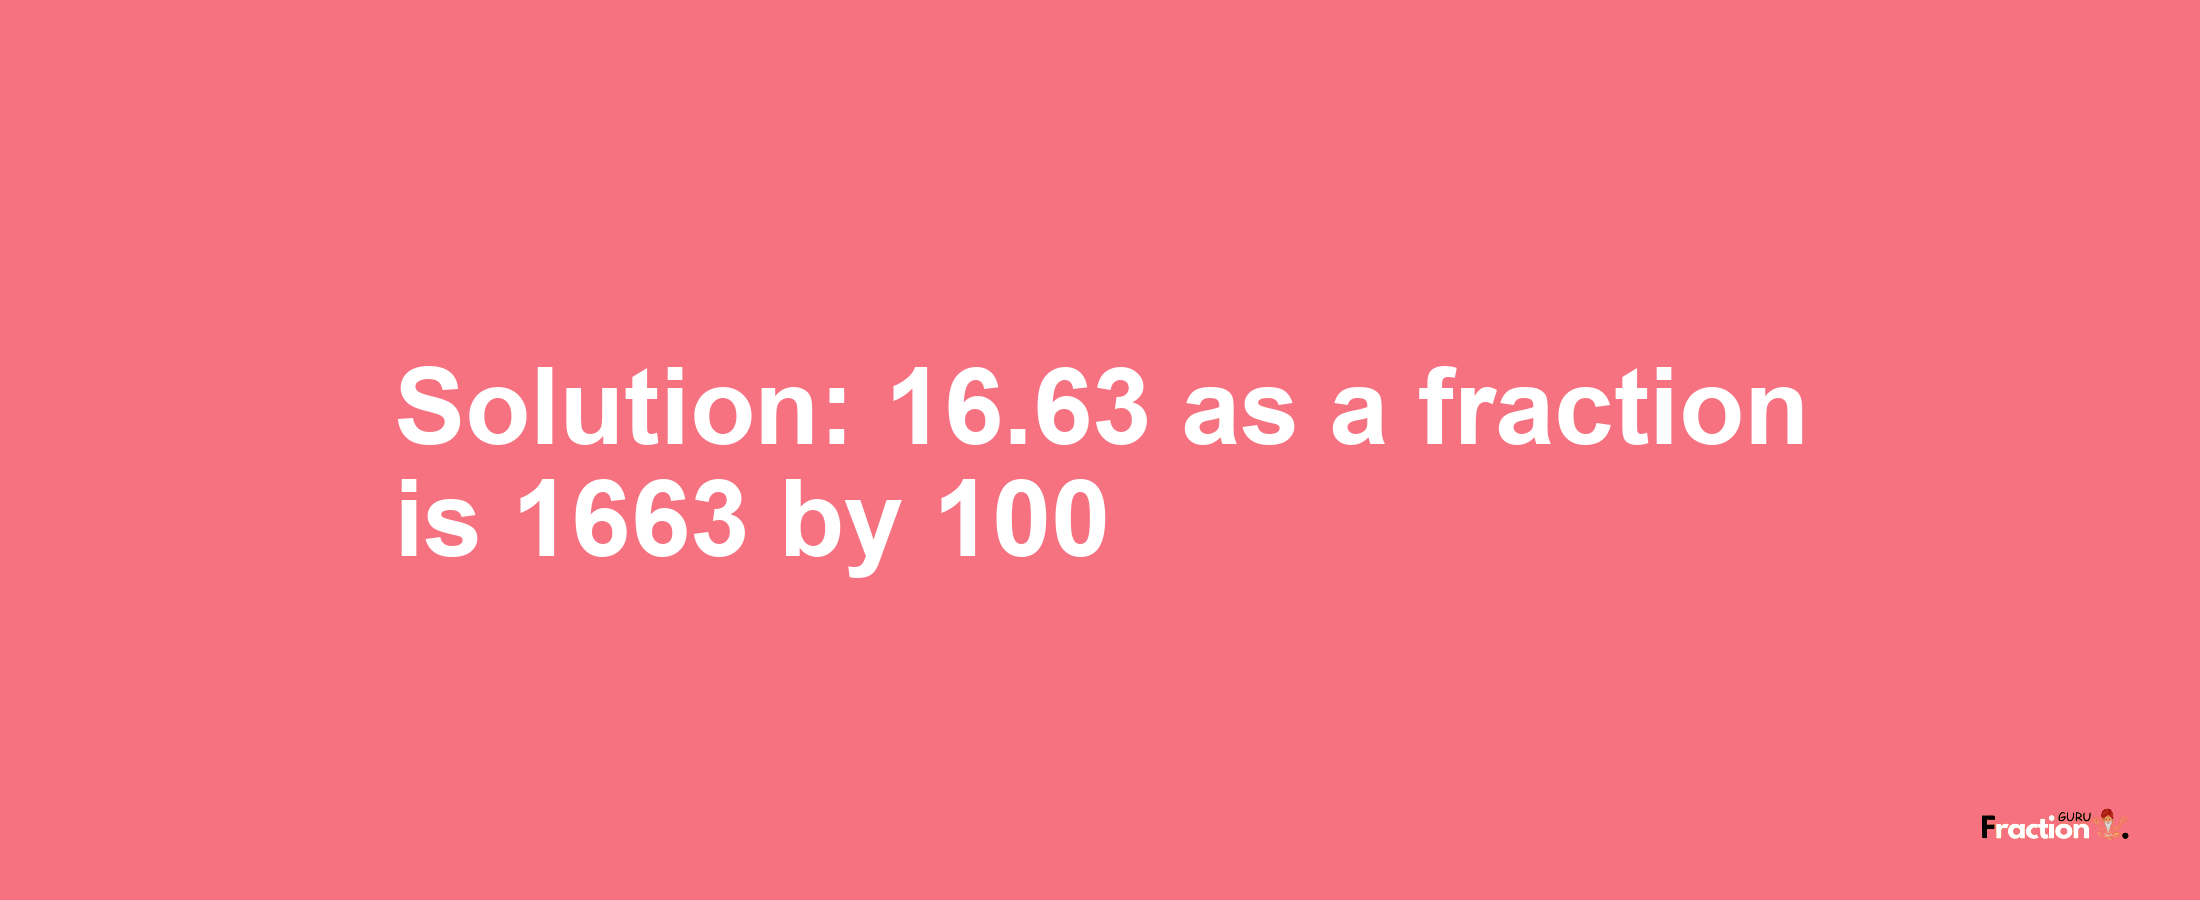 Solution:16.63 as a fraction is 1663/100